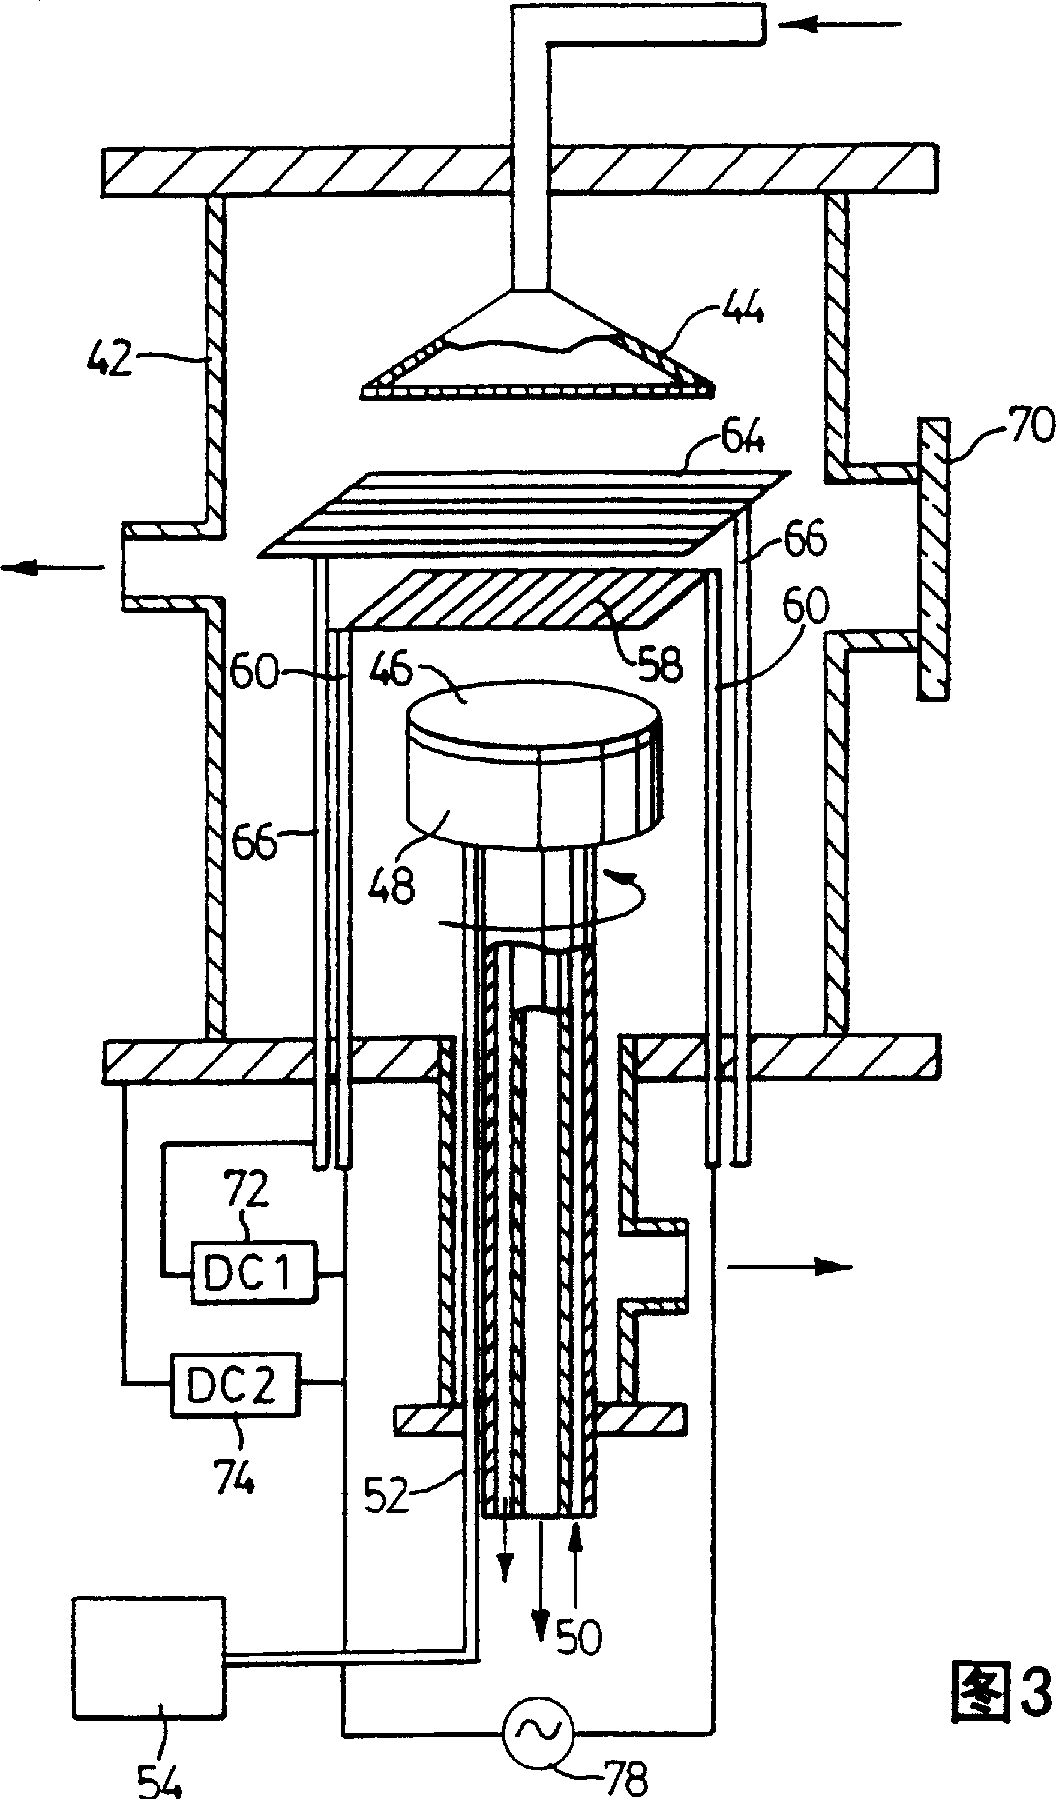 Apparatus and method for nucleotion and deposition of diamond using hot-filament DC plasma